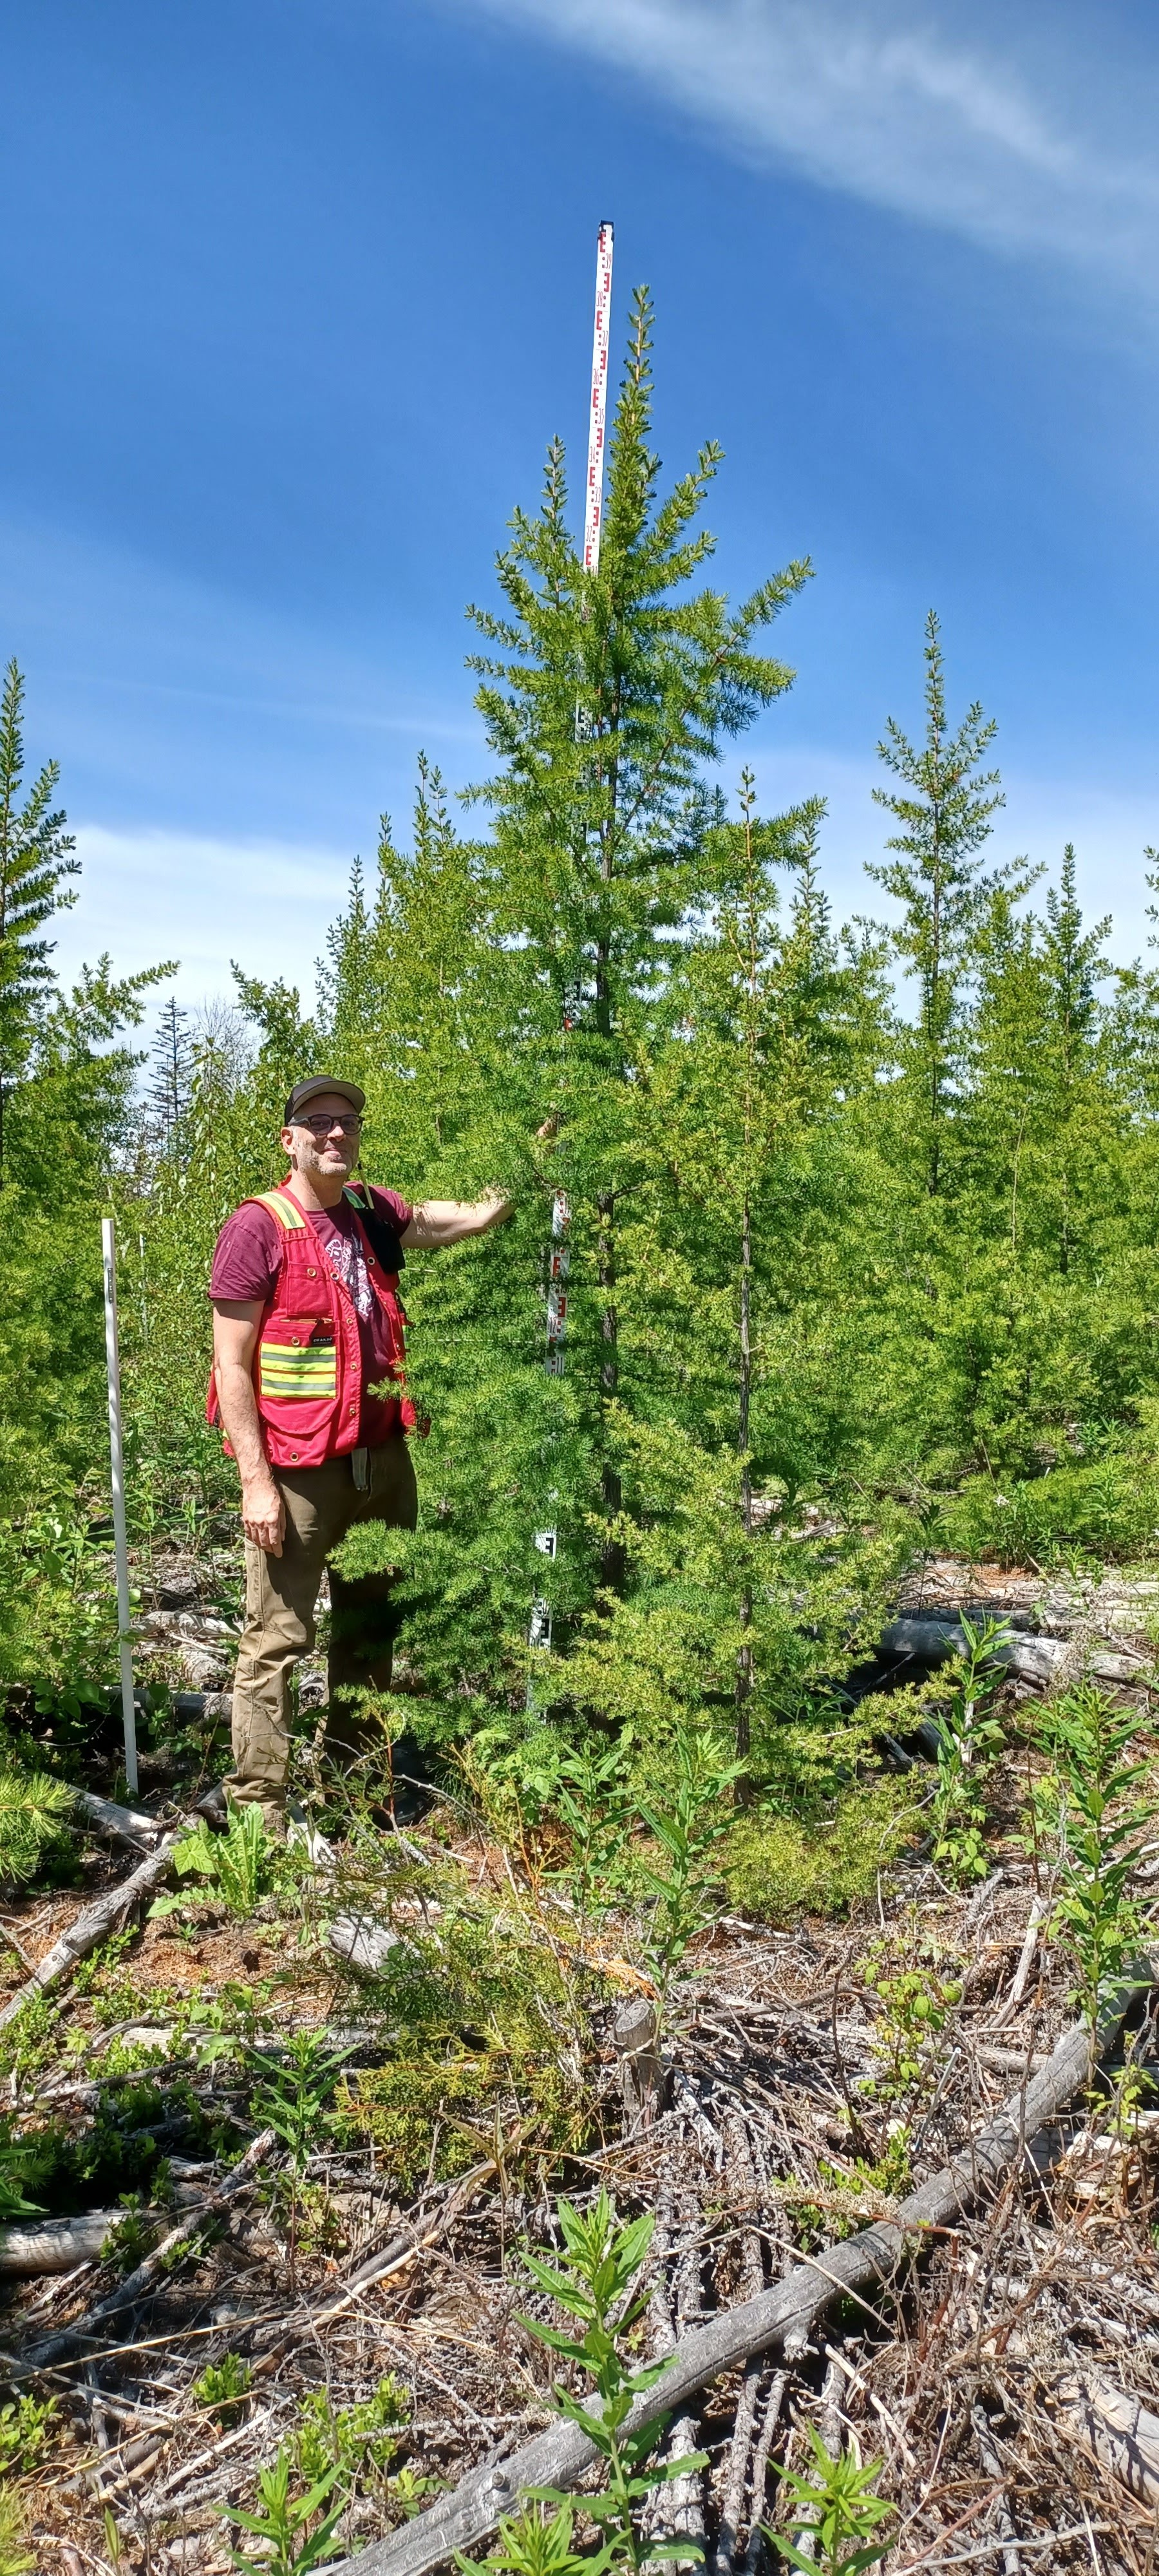 A researcher in a red and yellow safety vest holds a measuring stick beside a 4-metre-tall tree.